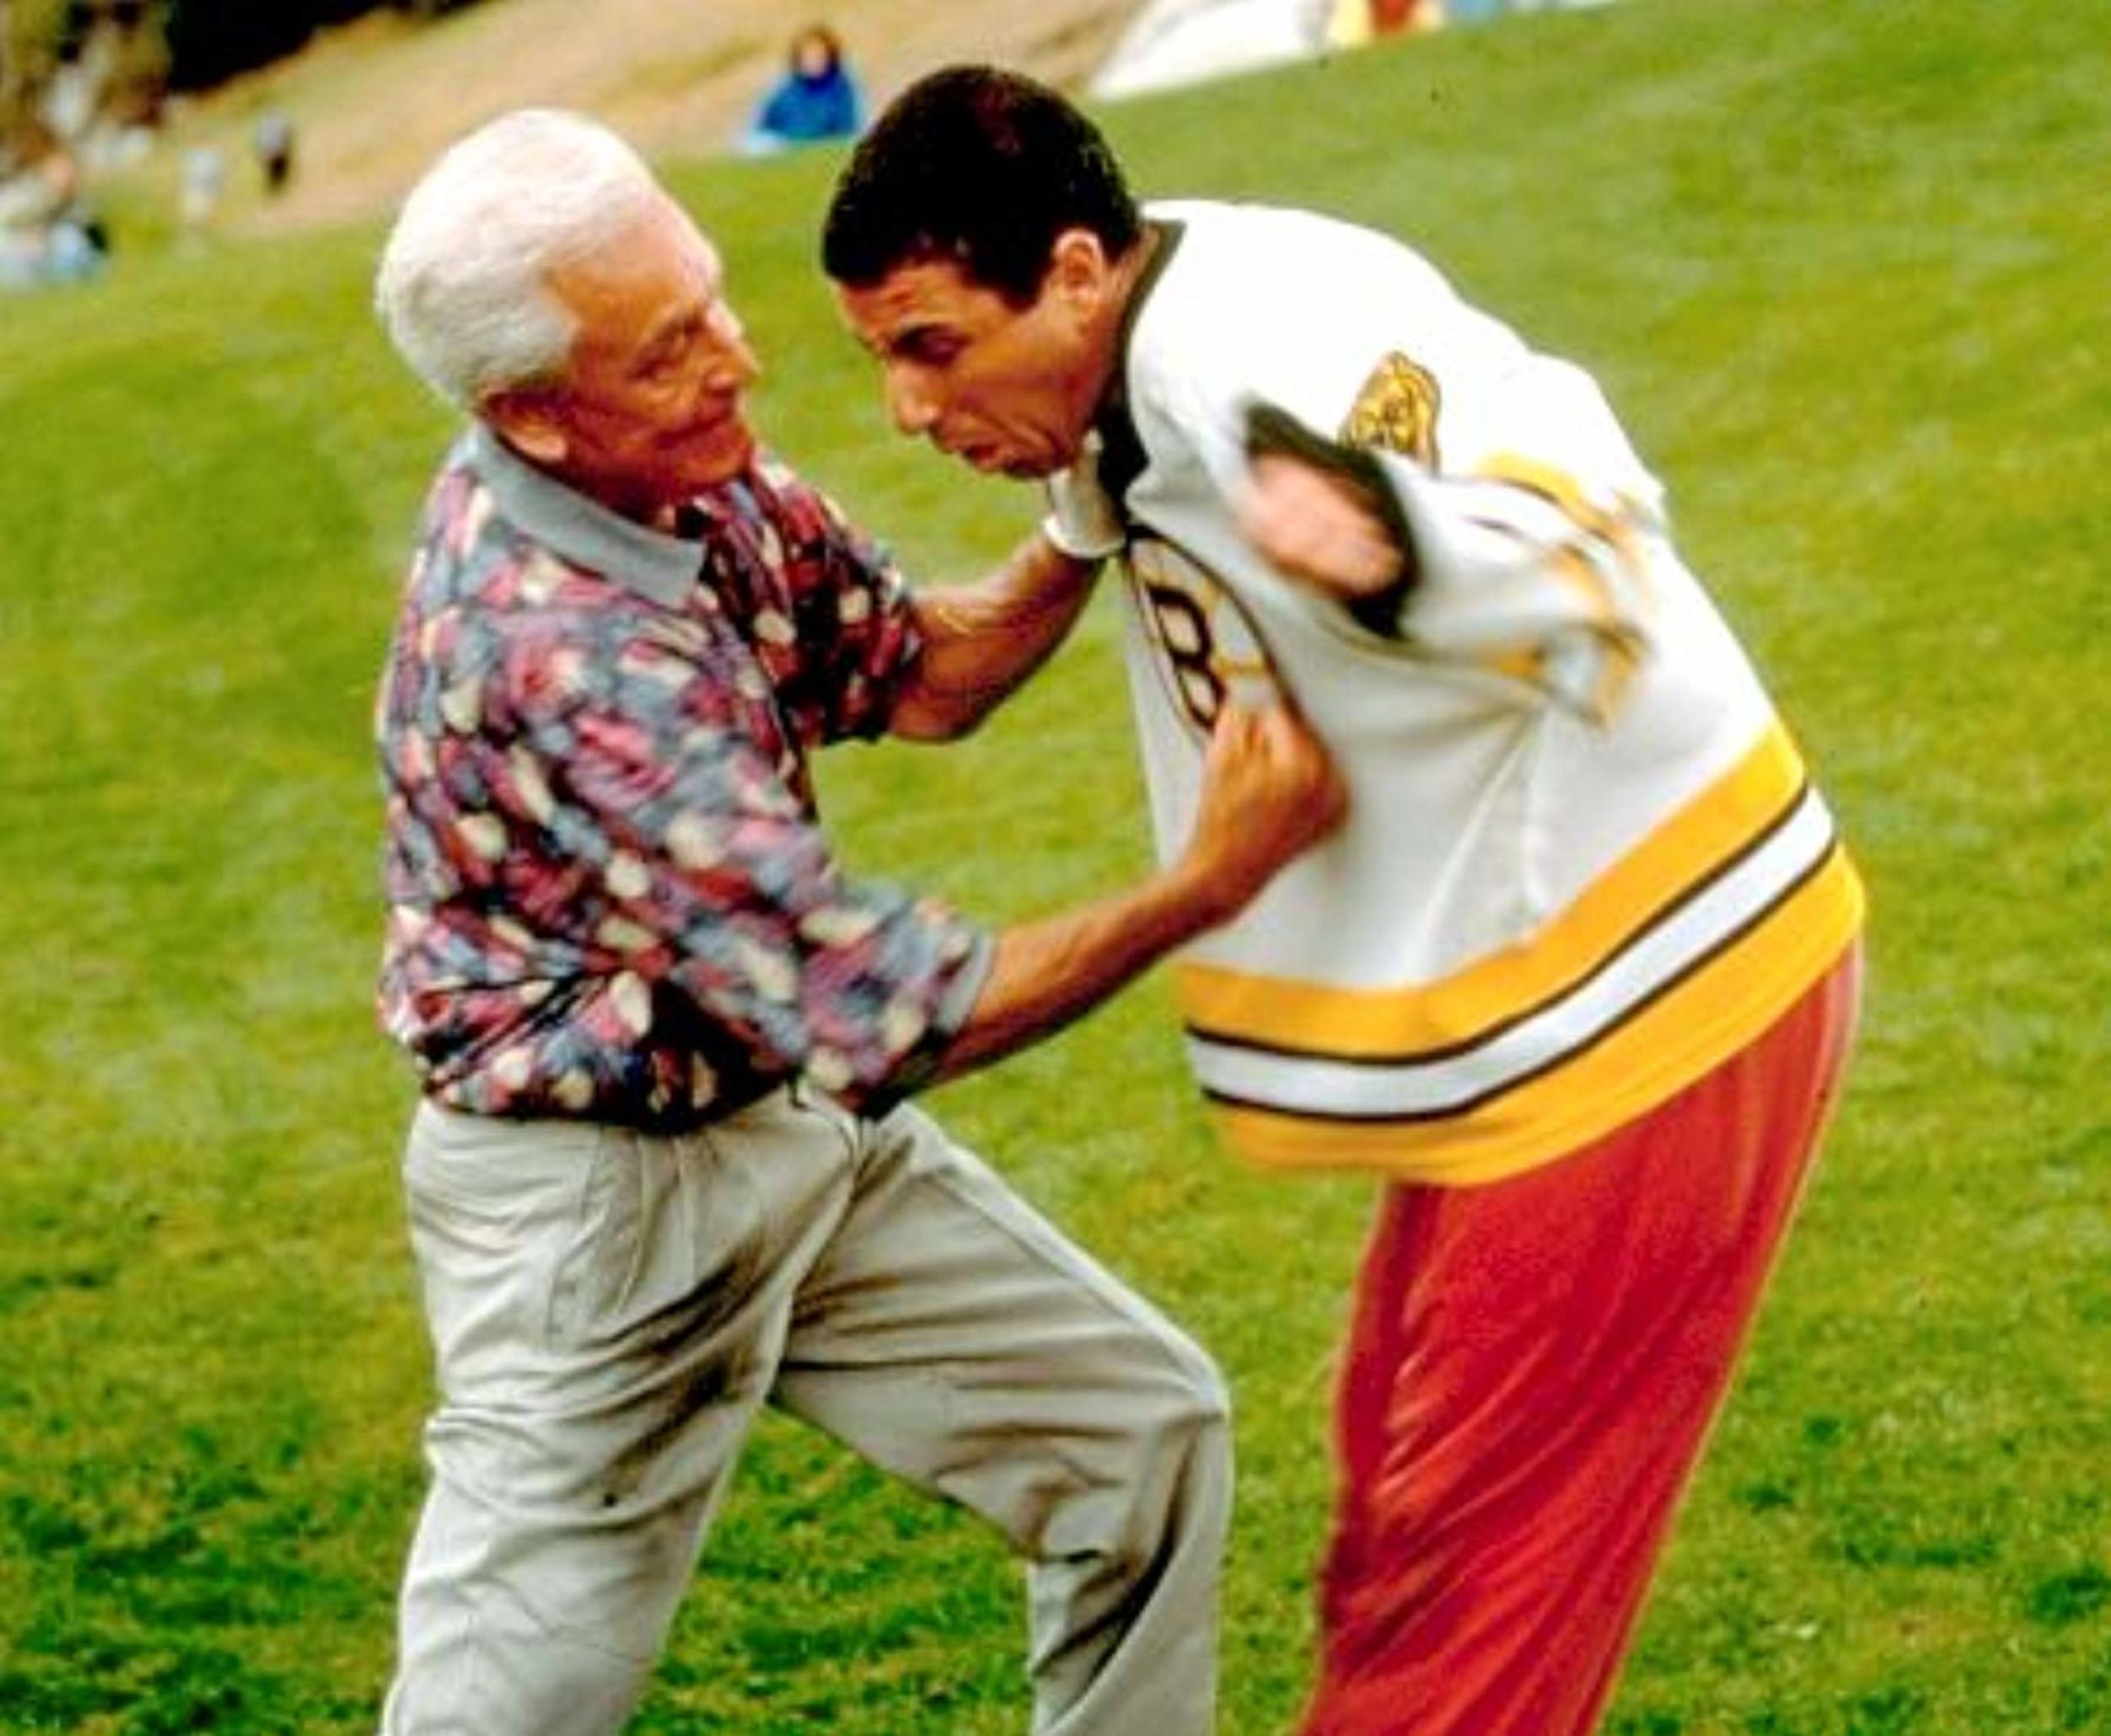 <p>Is “Happy Gilmore” at all realistic? Well, Adam Sandler plays a failed hockey player who becomes a pro golfer thanks to his big drives. Also, his mentor is a guy who had his hand bit off by a gator. It’s silly, but it’s the funniest movie Sandler ever made. It also had a great Bob Barker cameo.</p><p>You may also like: <a href='https://www.yardbarker.com/nfl/articles/the_best_seasons_by_nfl_undrafted_rookies/s1__40196262'>The best seasons by NFL undrafted rookies</a></p>